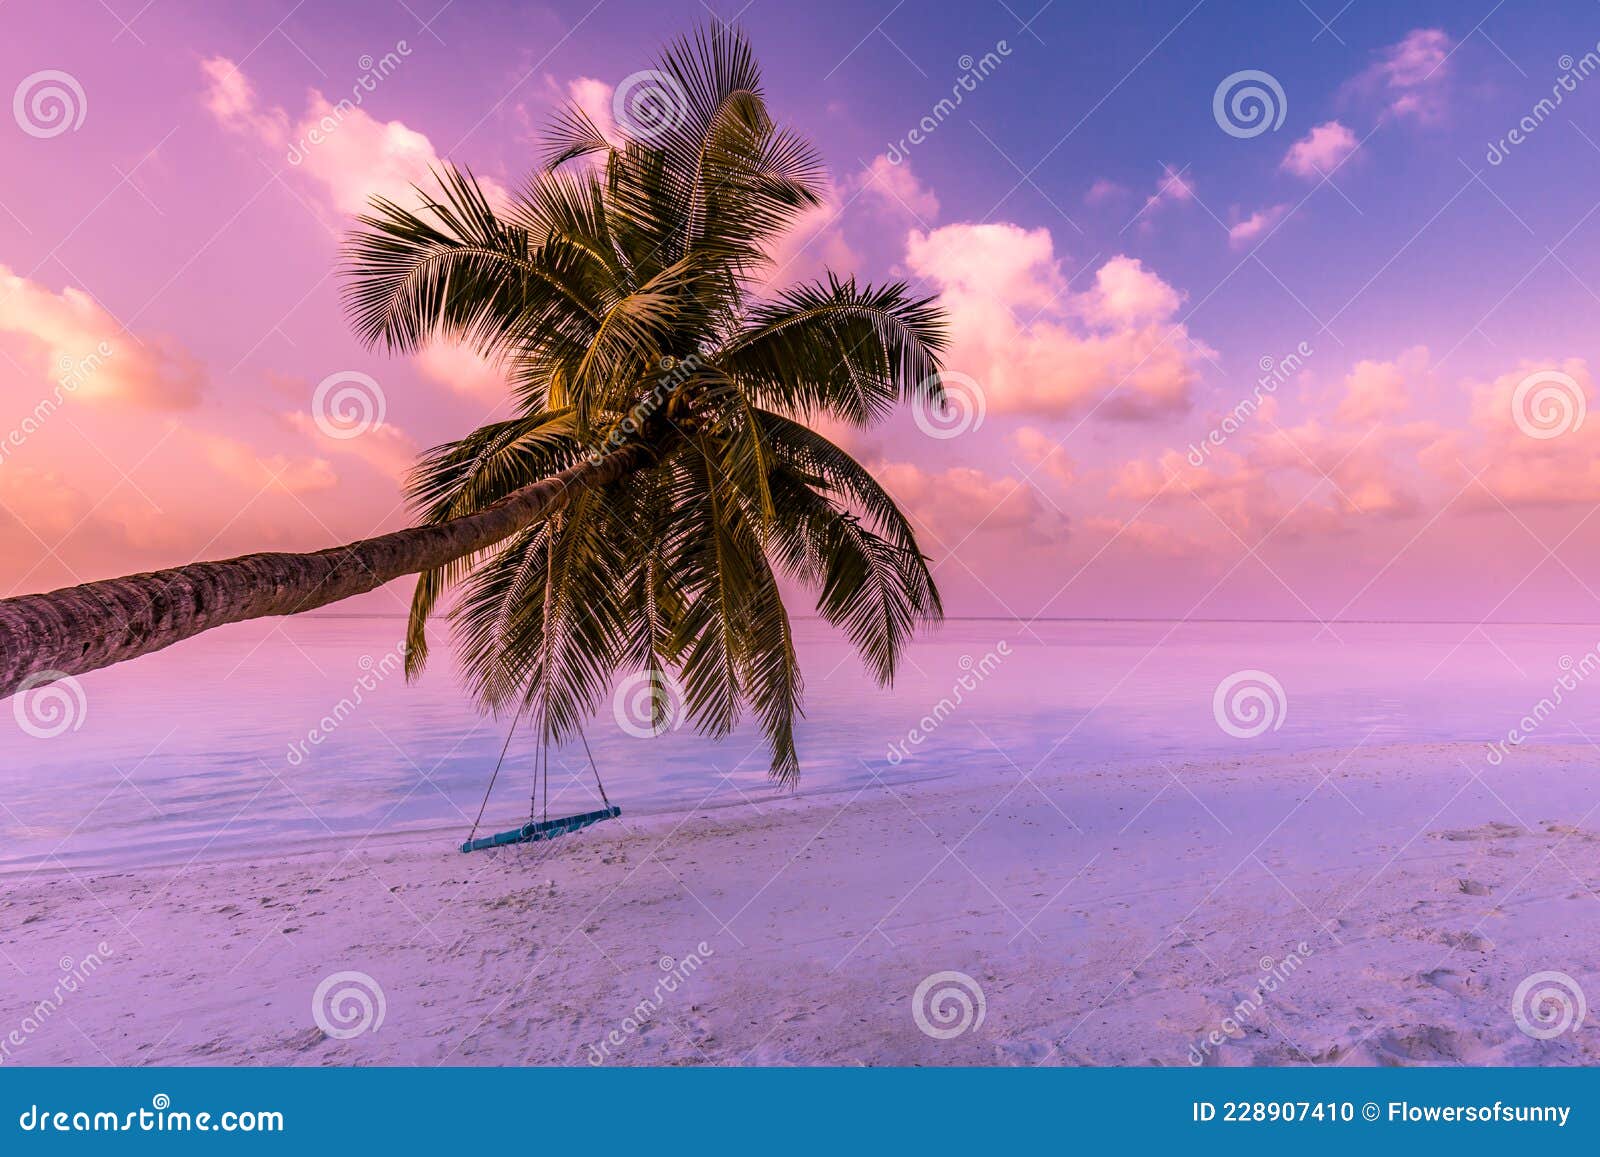 Buy photo wallpaper with beach and sea online  Wallpaper